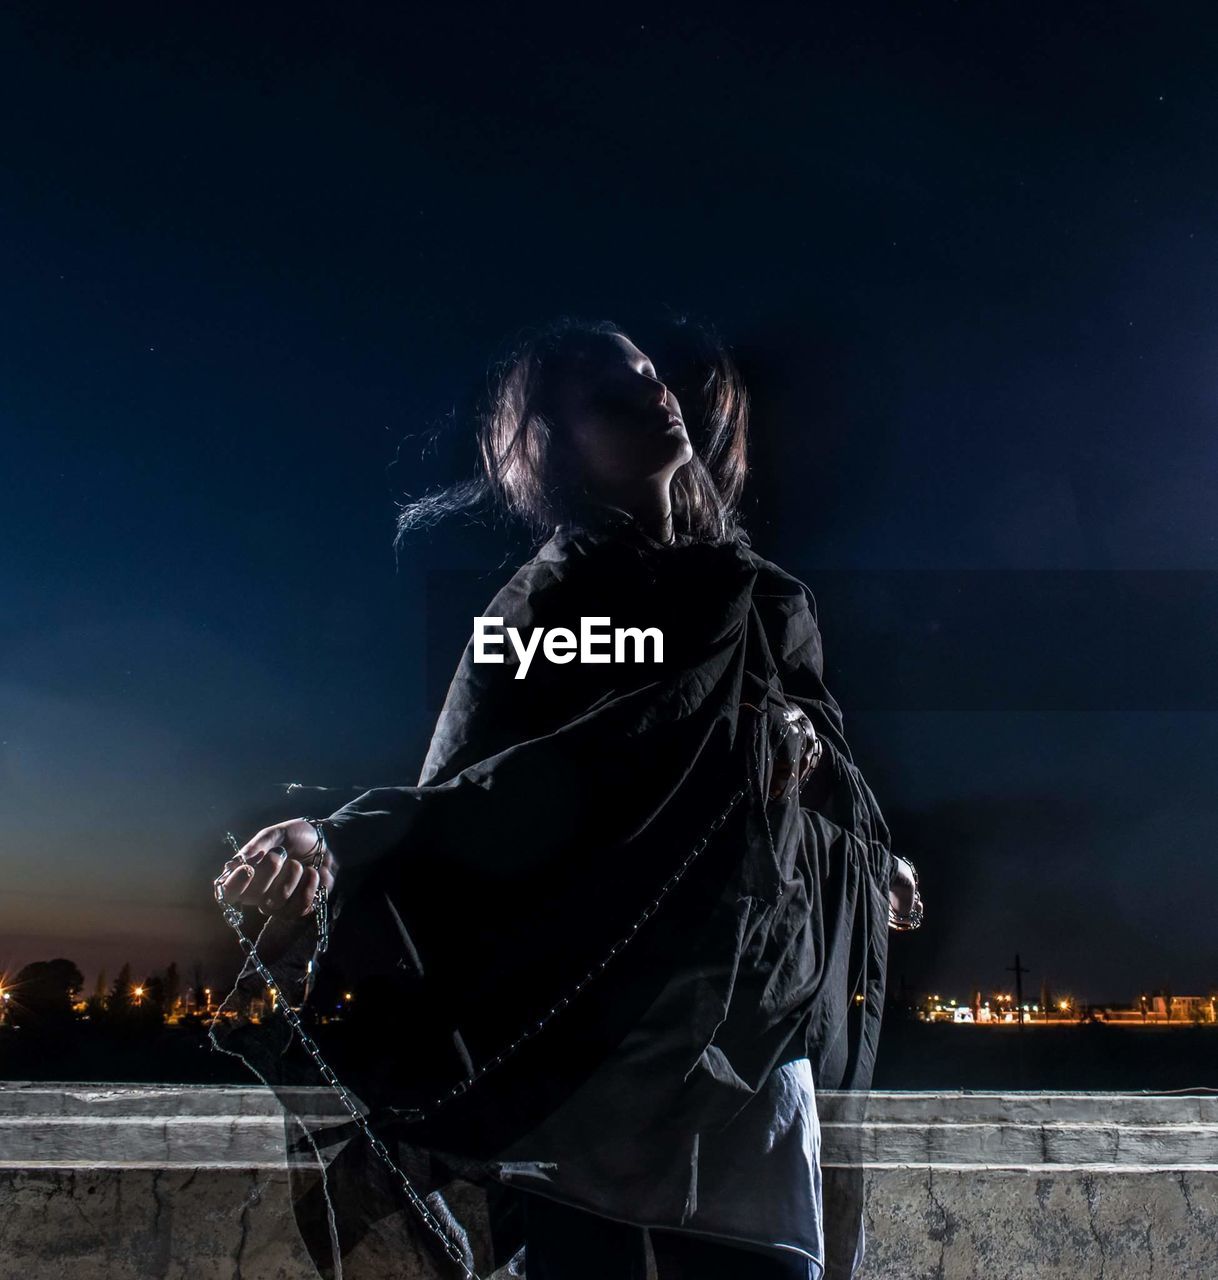 Double exposure image of woman holding chain against sky at night